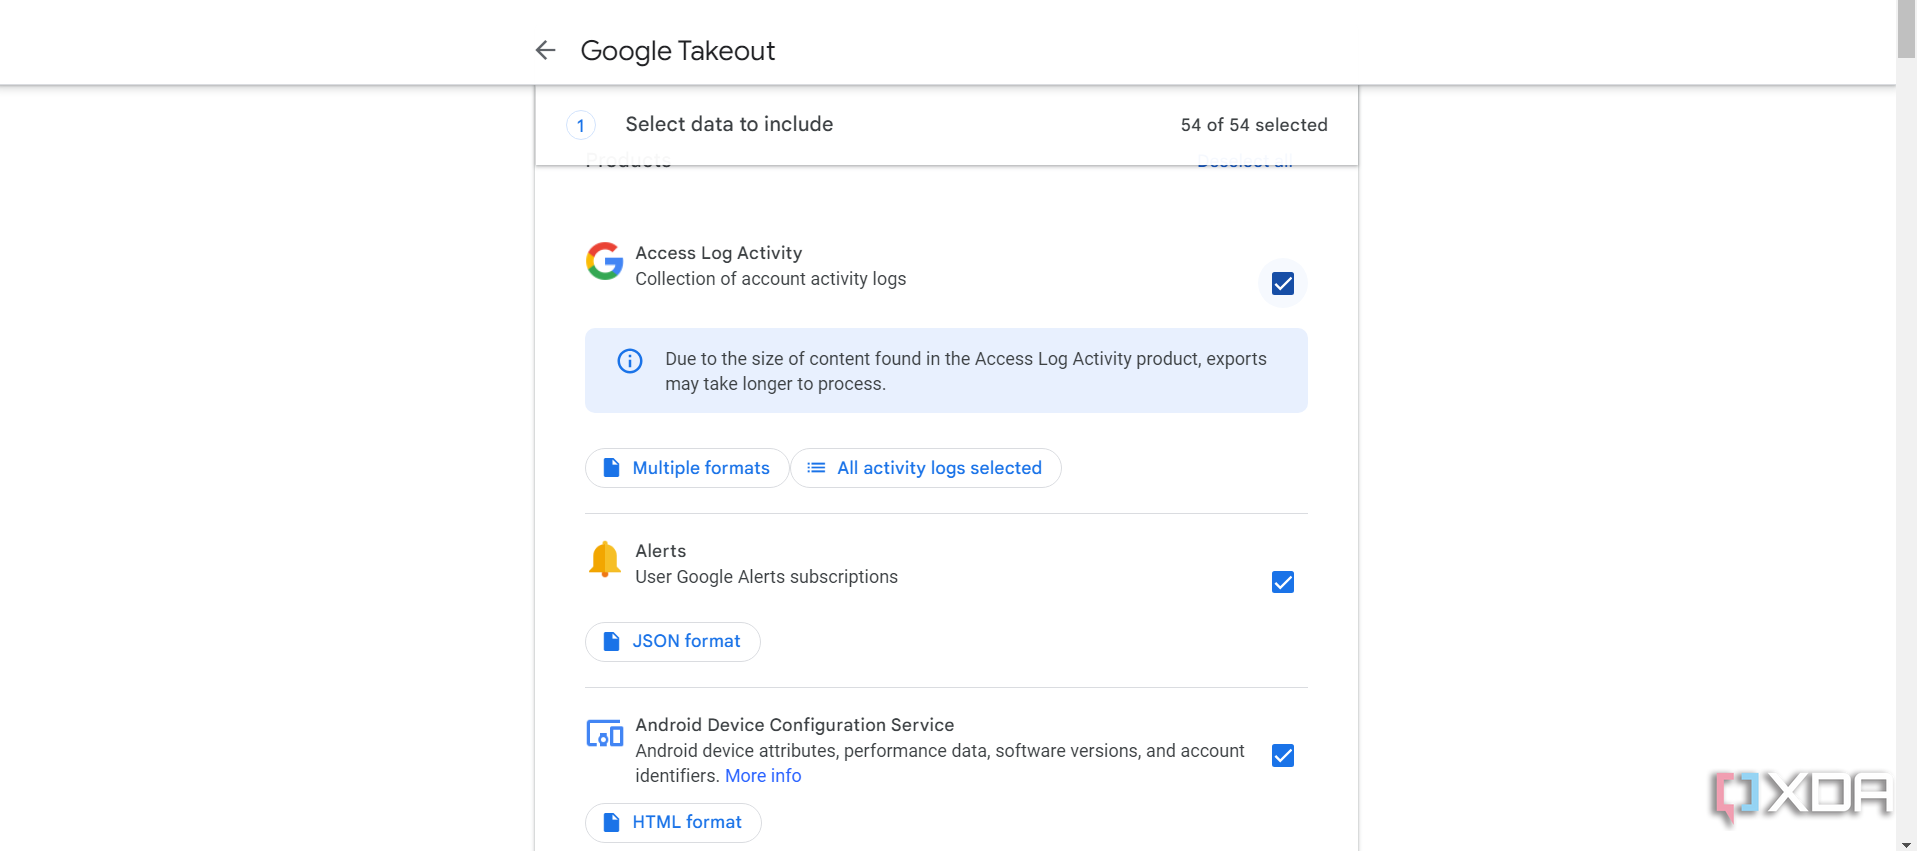 Selecting data to export via Google Takeout